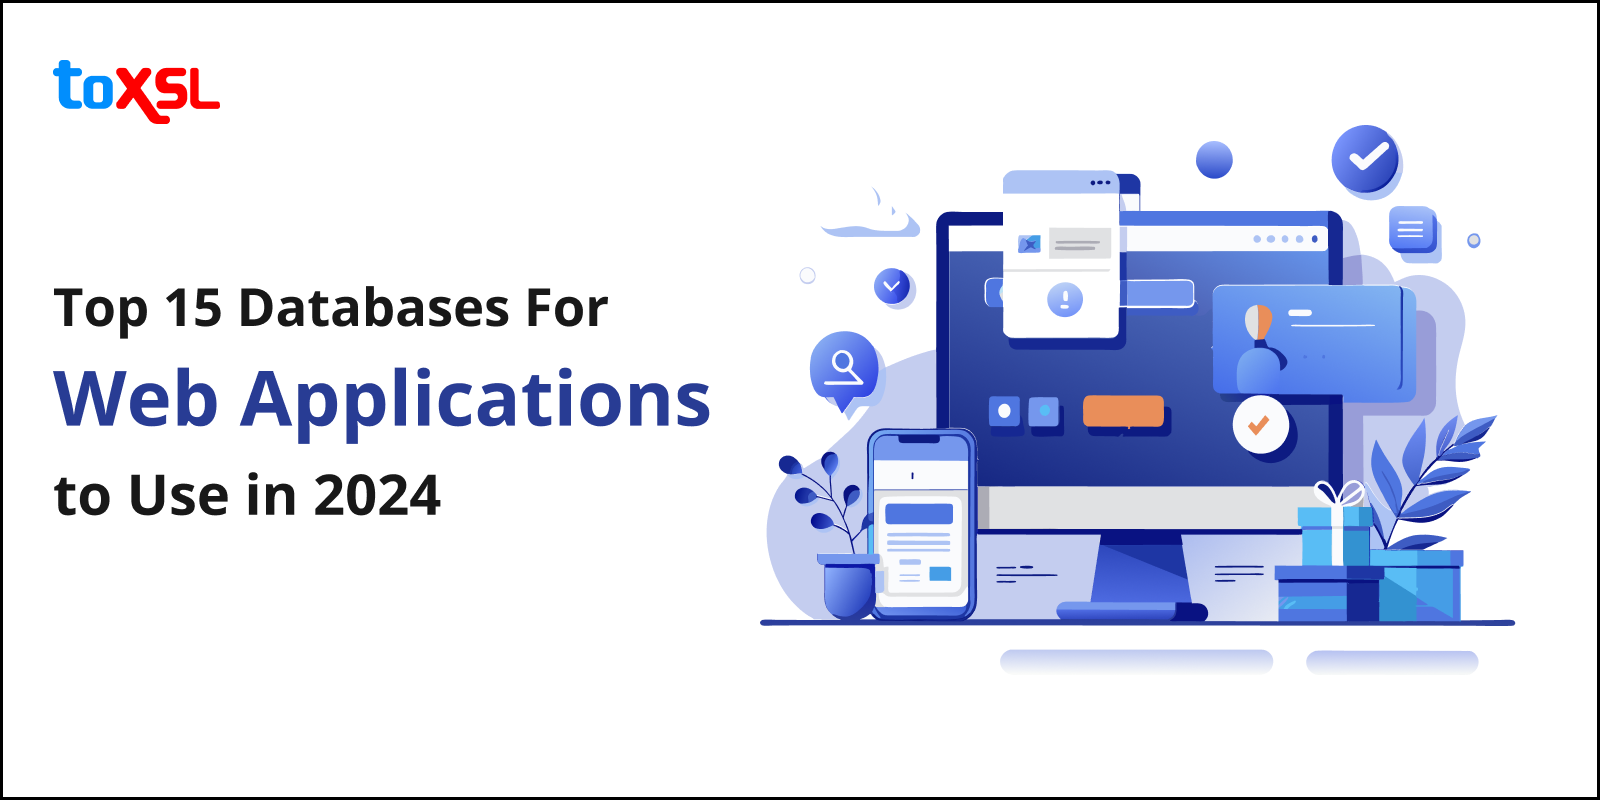 Top 15 Databases for Web Applications to Use in 2024